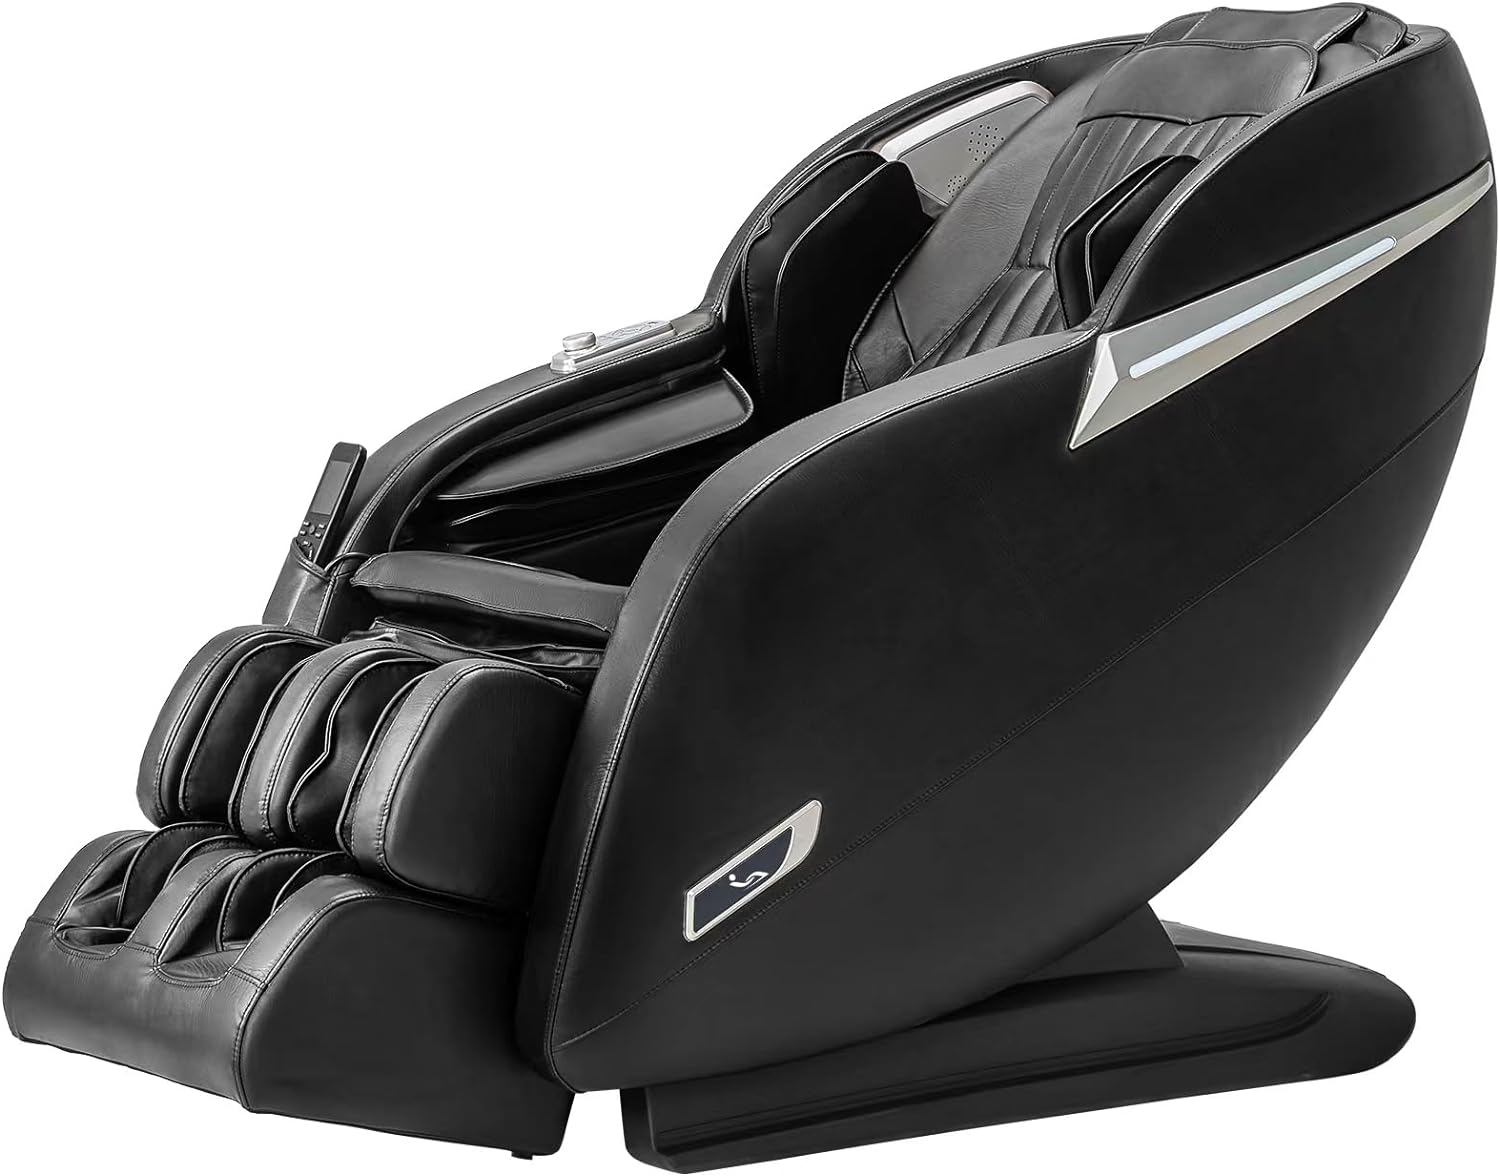 Mythia Md906 Massage Chair Review A Comprehensive Look At The Ultimate Relaxation Companion For 